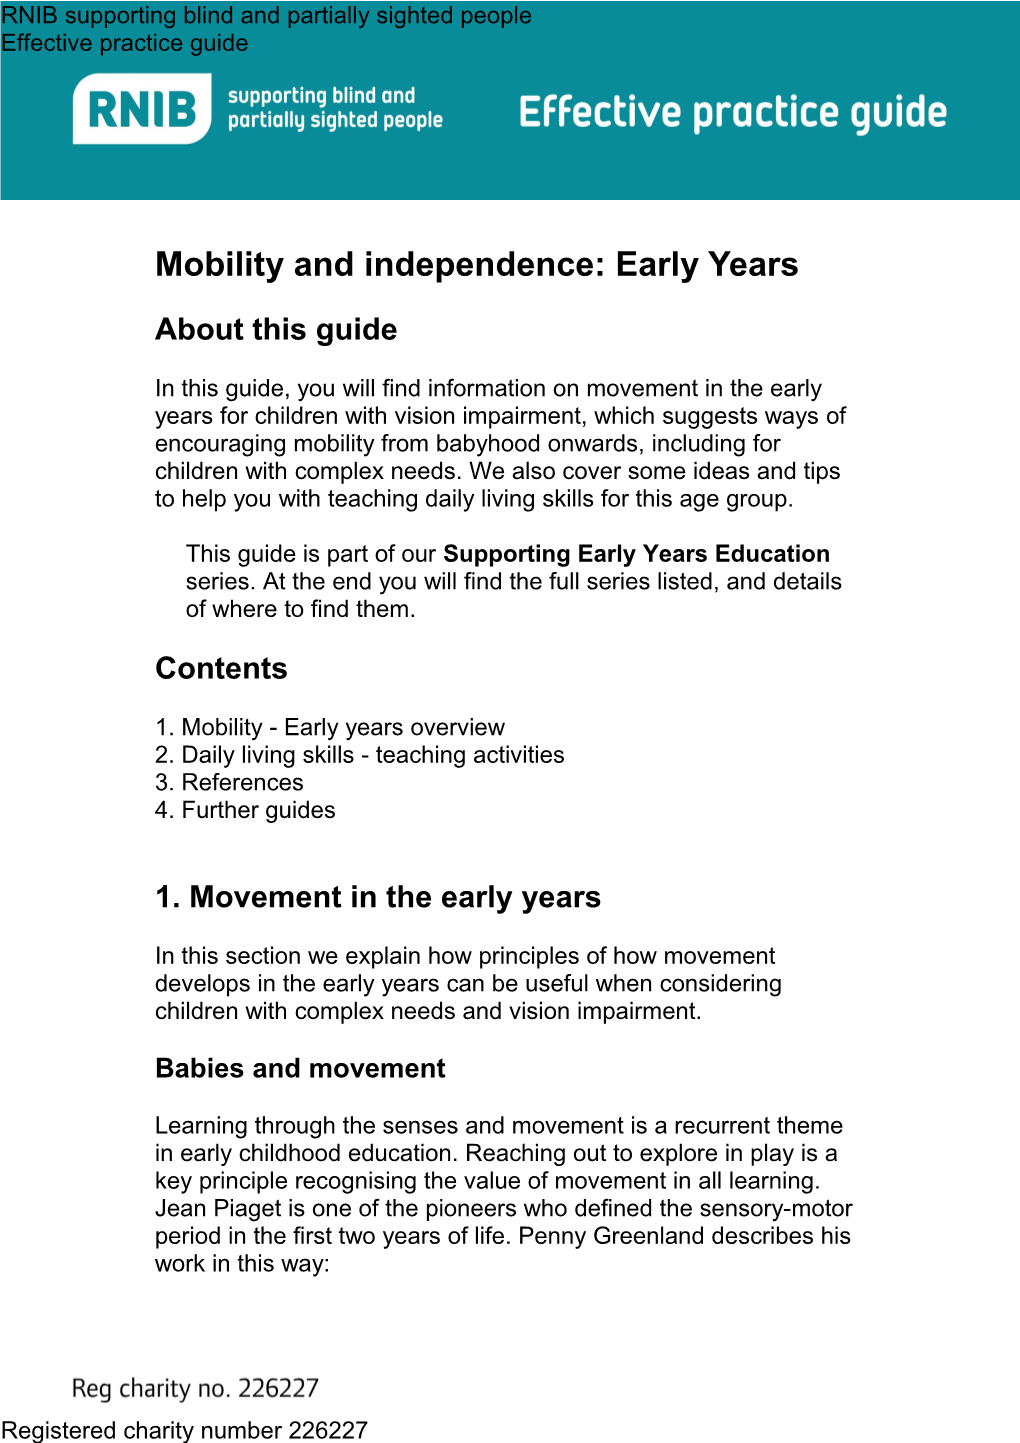 Mobility and Independence Early Years